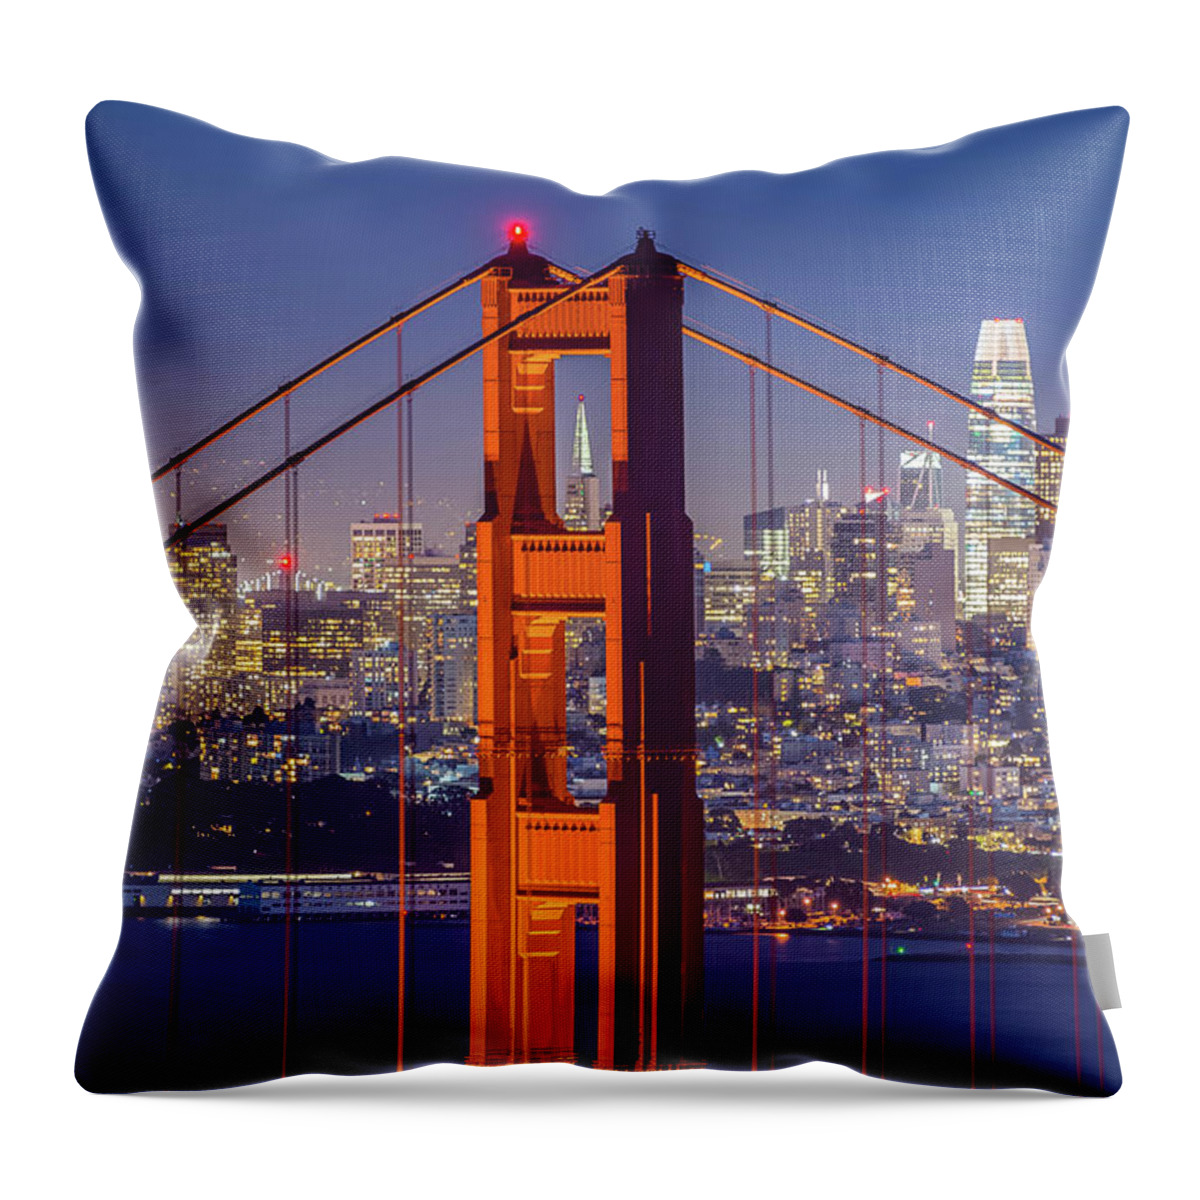 Golden Gate Bridge Throw Pillow featuring the photograph The Golden Gate by Mike Ronnebeck